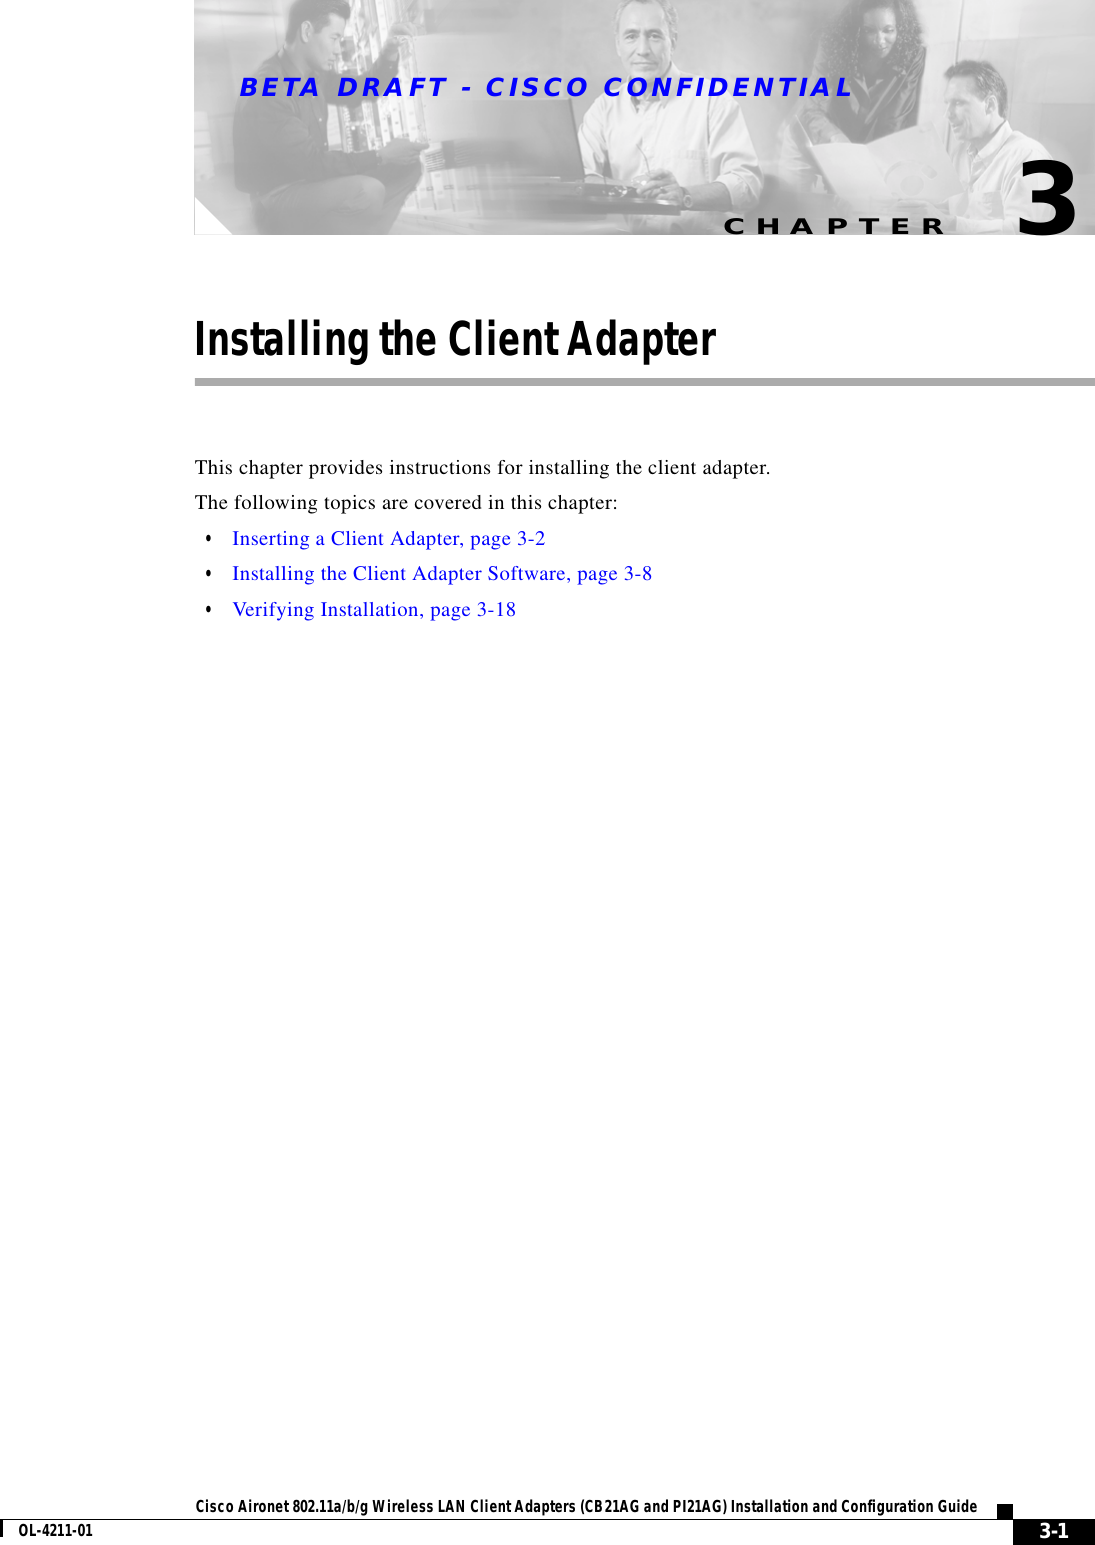 CHAPTERBETA DRAFT - CISCO CONFIDENTIAL3-1Cisco Aironet 802.11a/b/g Wireless LAN Client Adapters (CB21AG and PI21AG) Installation and Configuration GuideOL-4211-013Installing the Client AdapterThis chapter provides instructions for installing the client adapter.The following topics are covered in this chapter:•Inserting a Client Adapter, page 3-2•Installing the Client Adapter Software, page 3-8•Verifying Installation, page 3-18